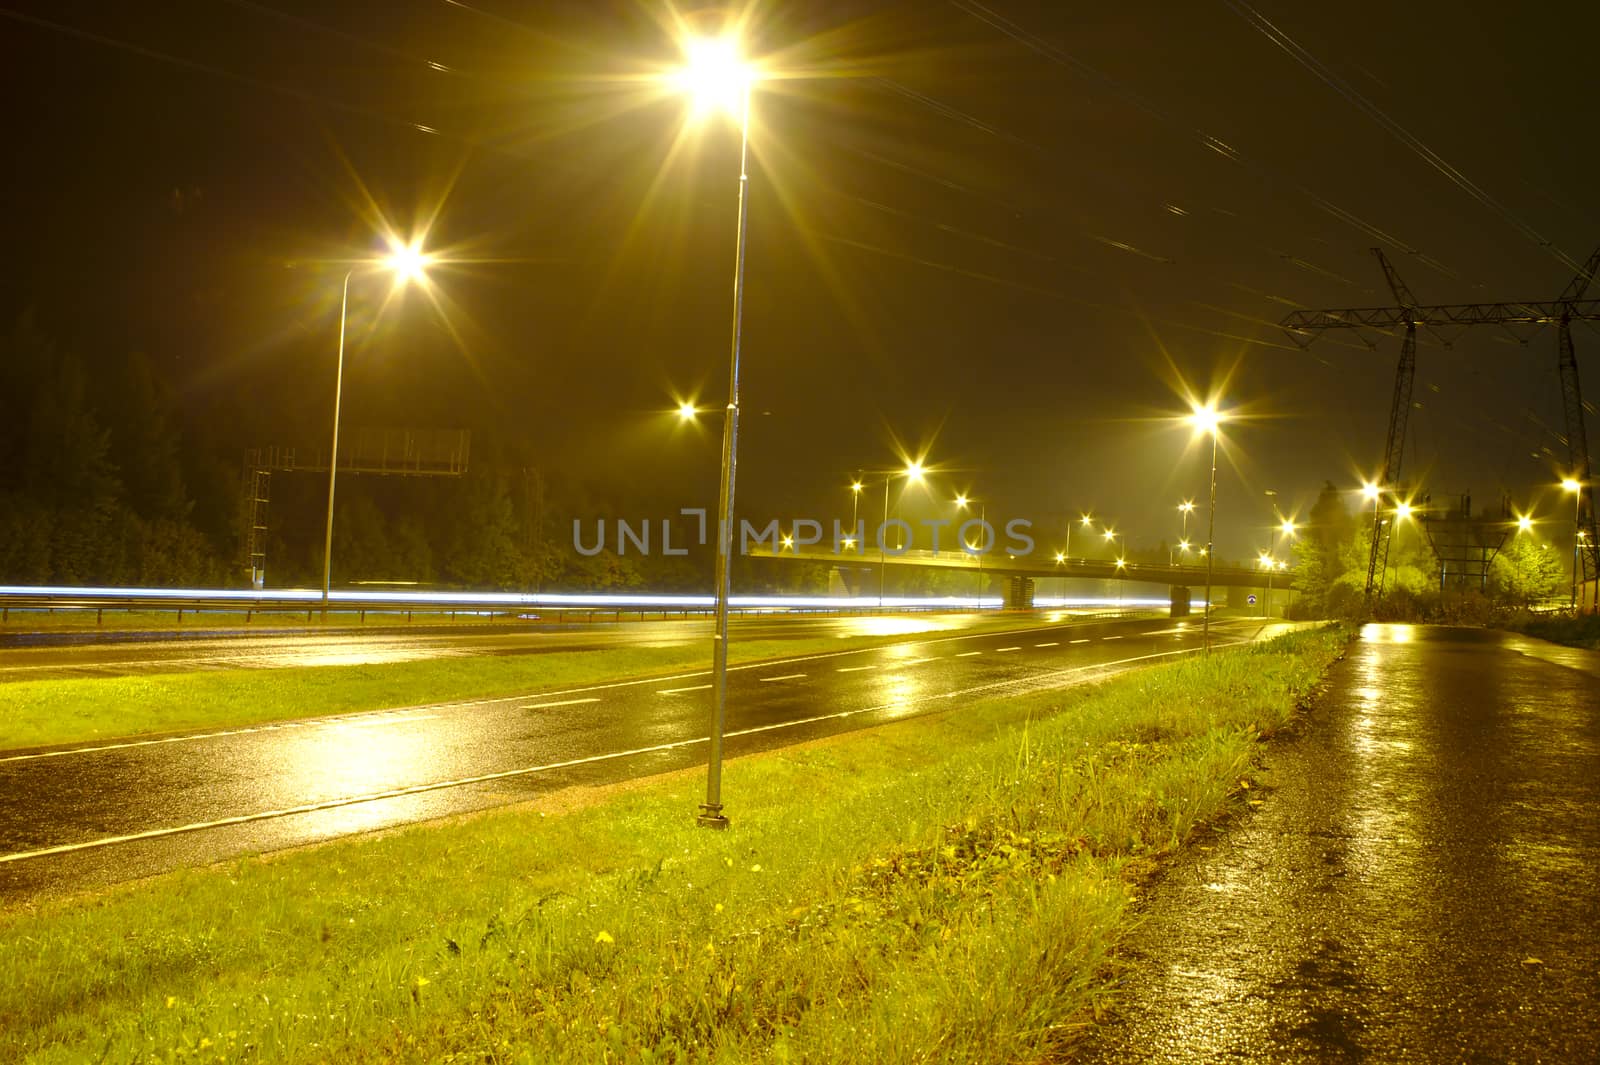 Empty motorway at rainy night with few cars passing leaving light trails.